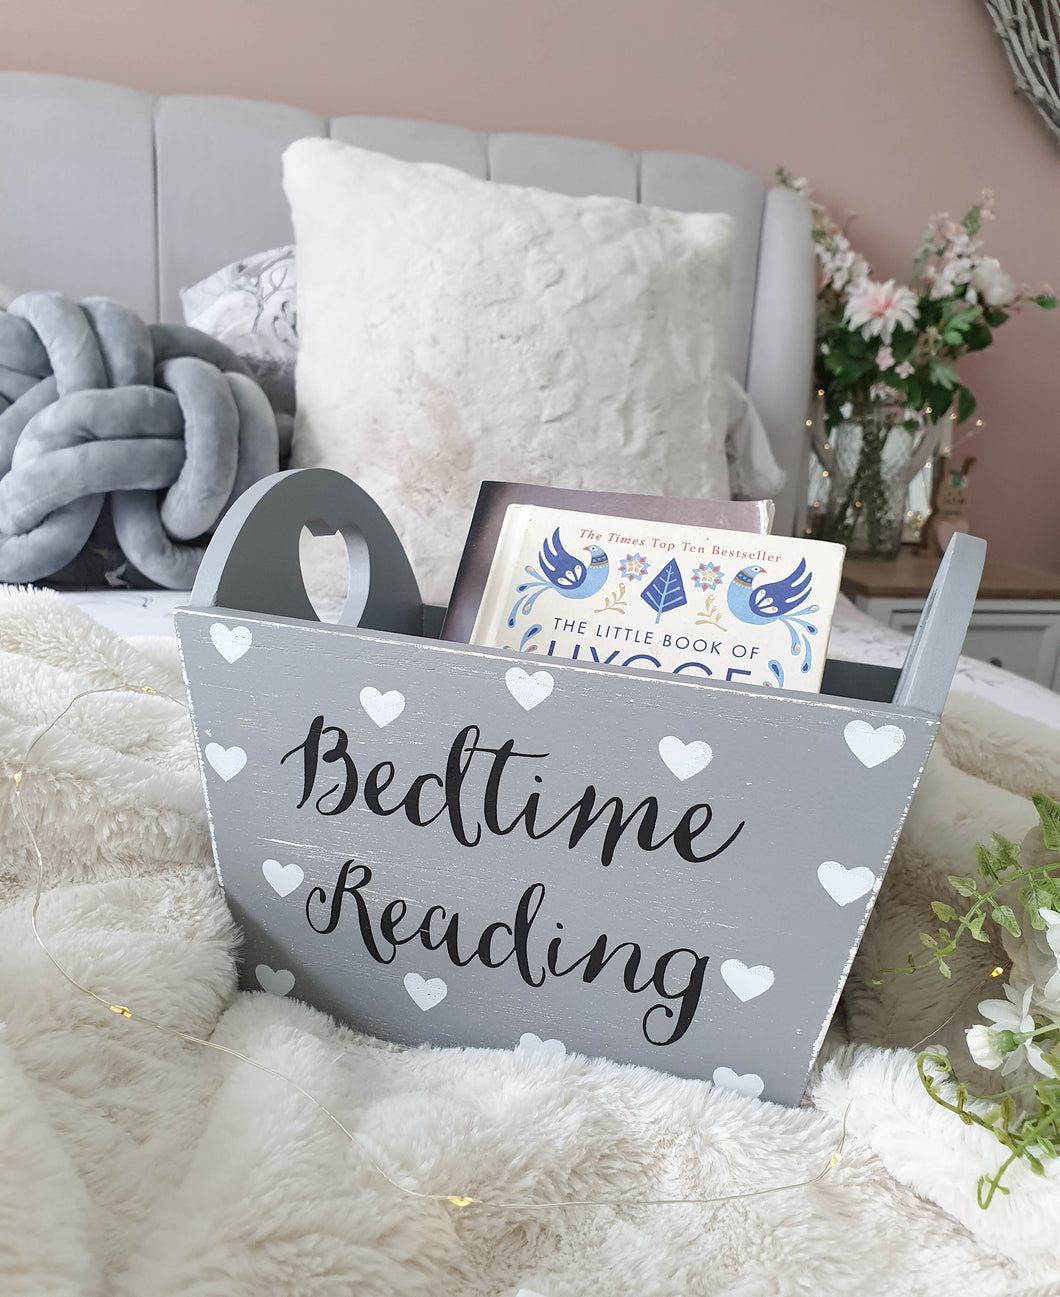 Grey & White Heart Bedtime Reading Crate